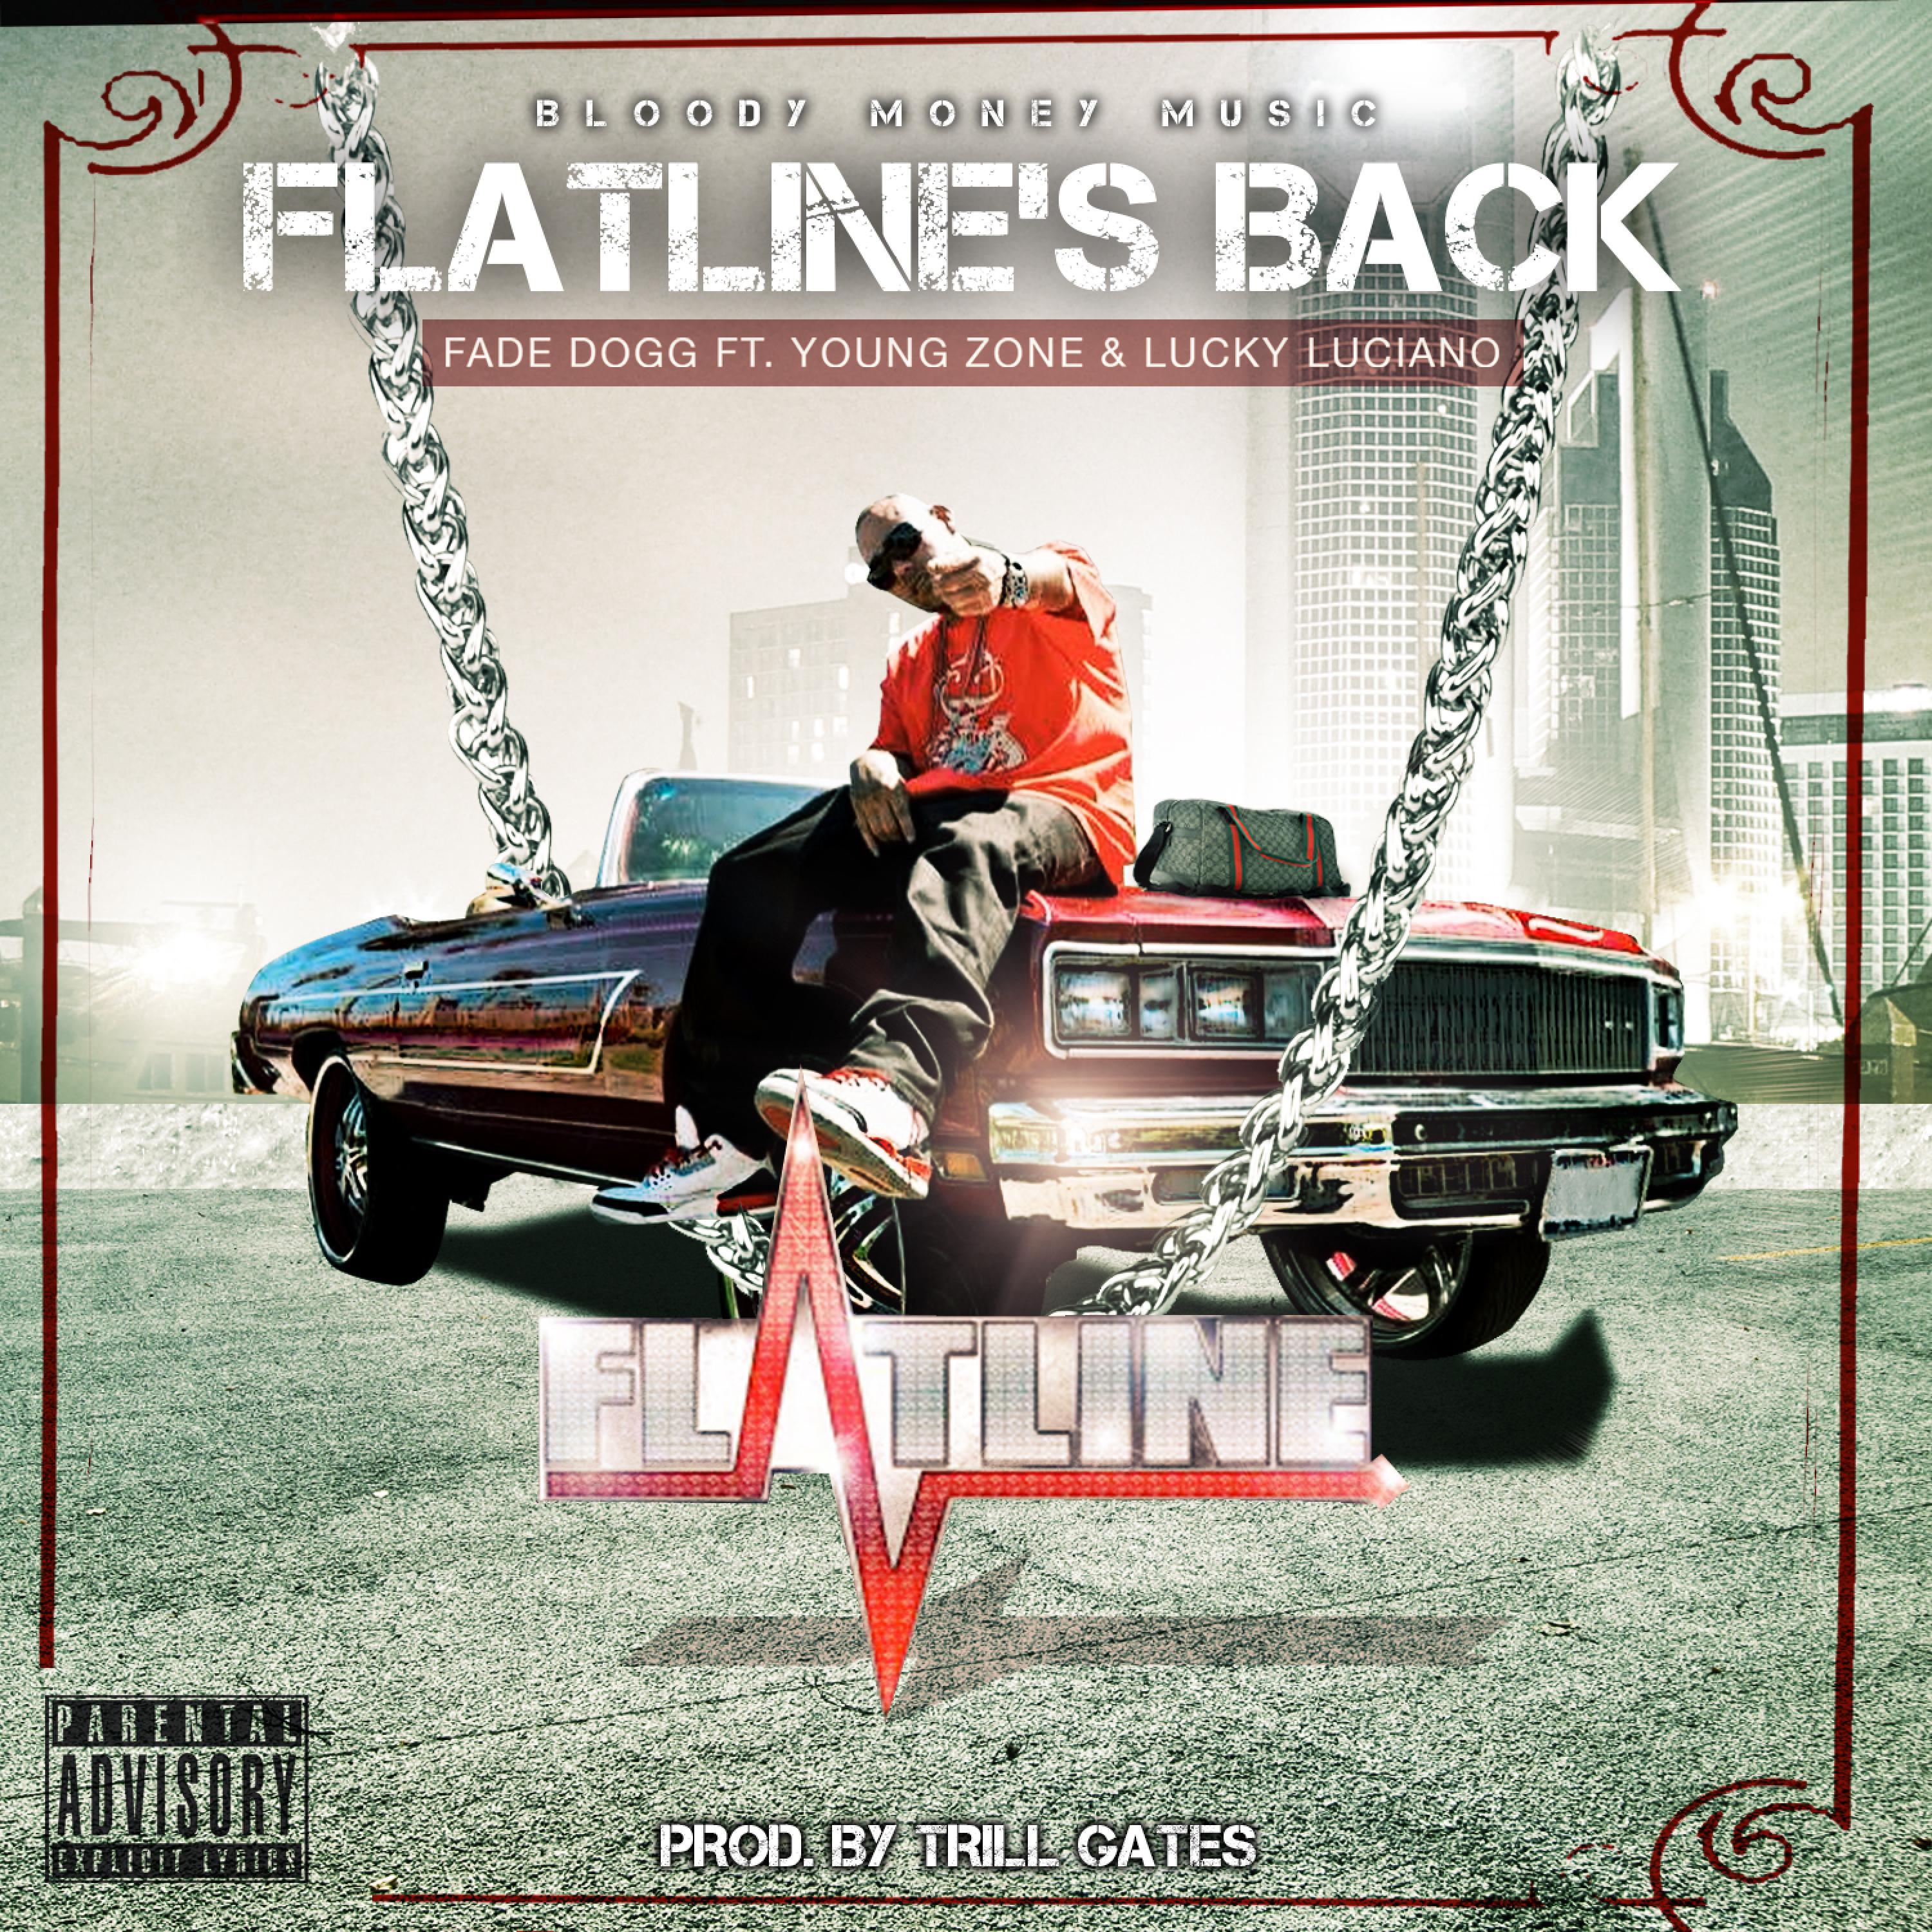 Flatline's Back (feat. Young Zone & Lucky Luciano)